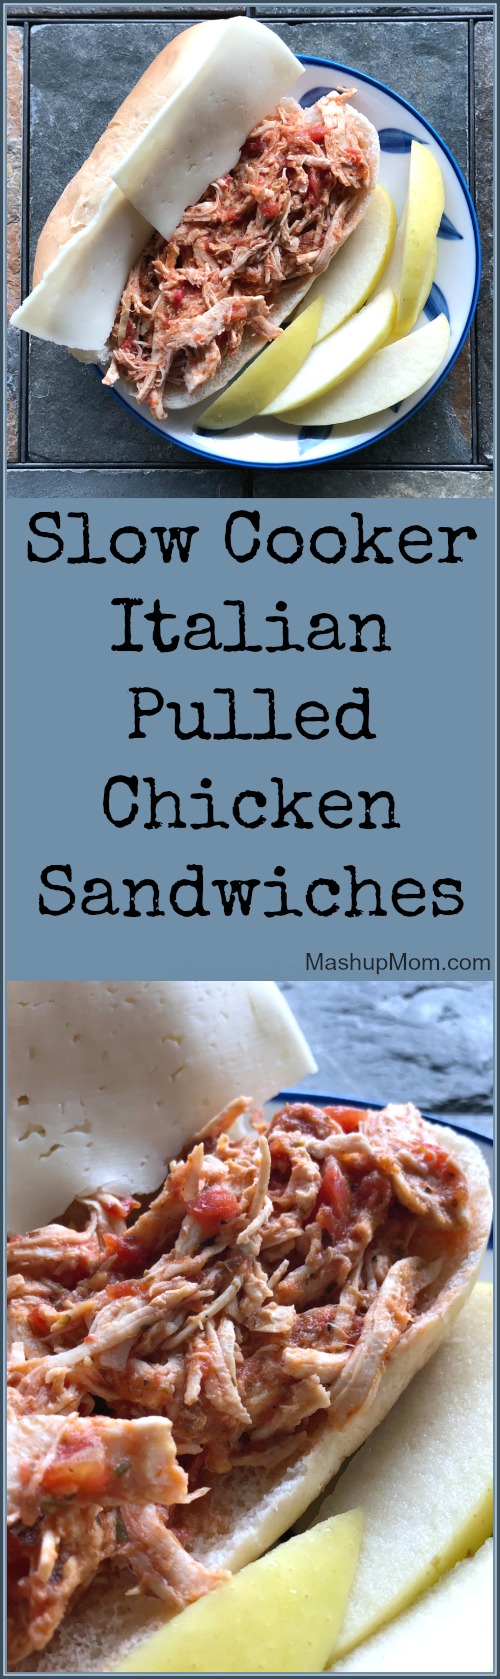 slow cooker pulled Italian chicken sandwiches